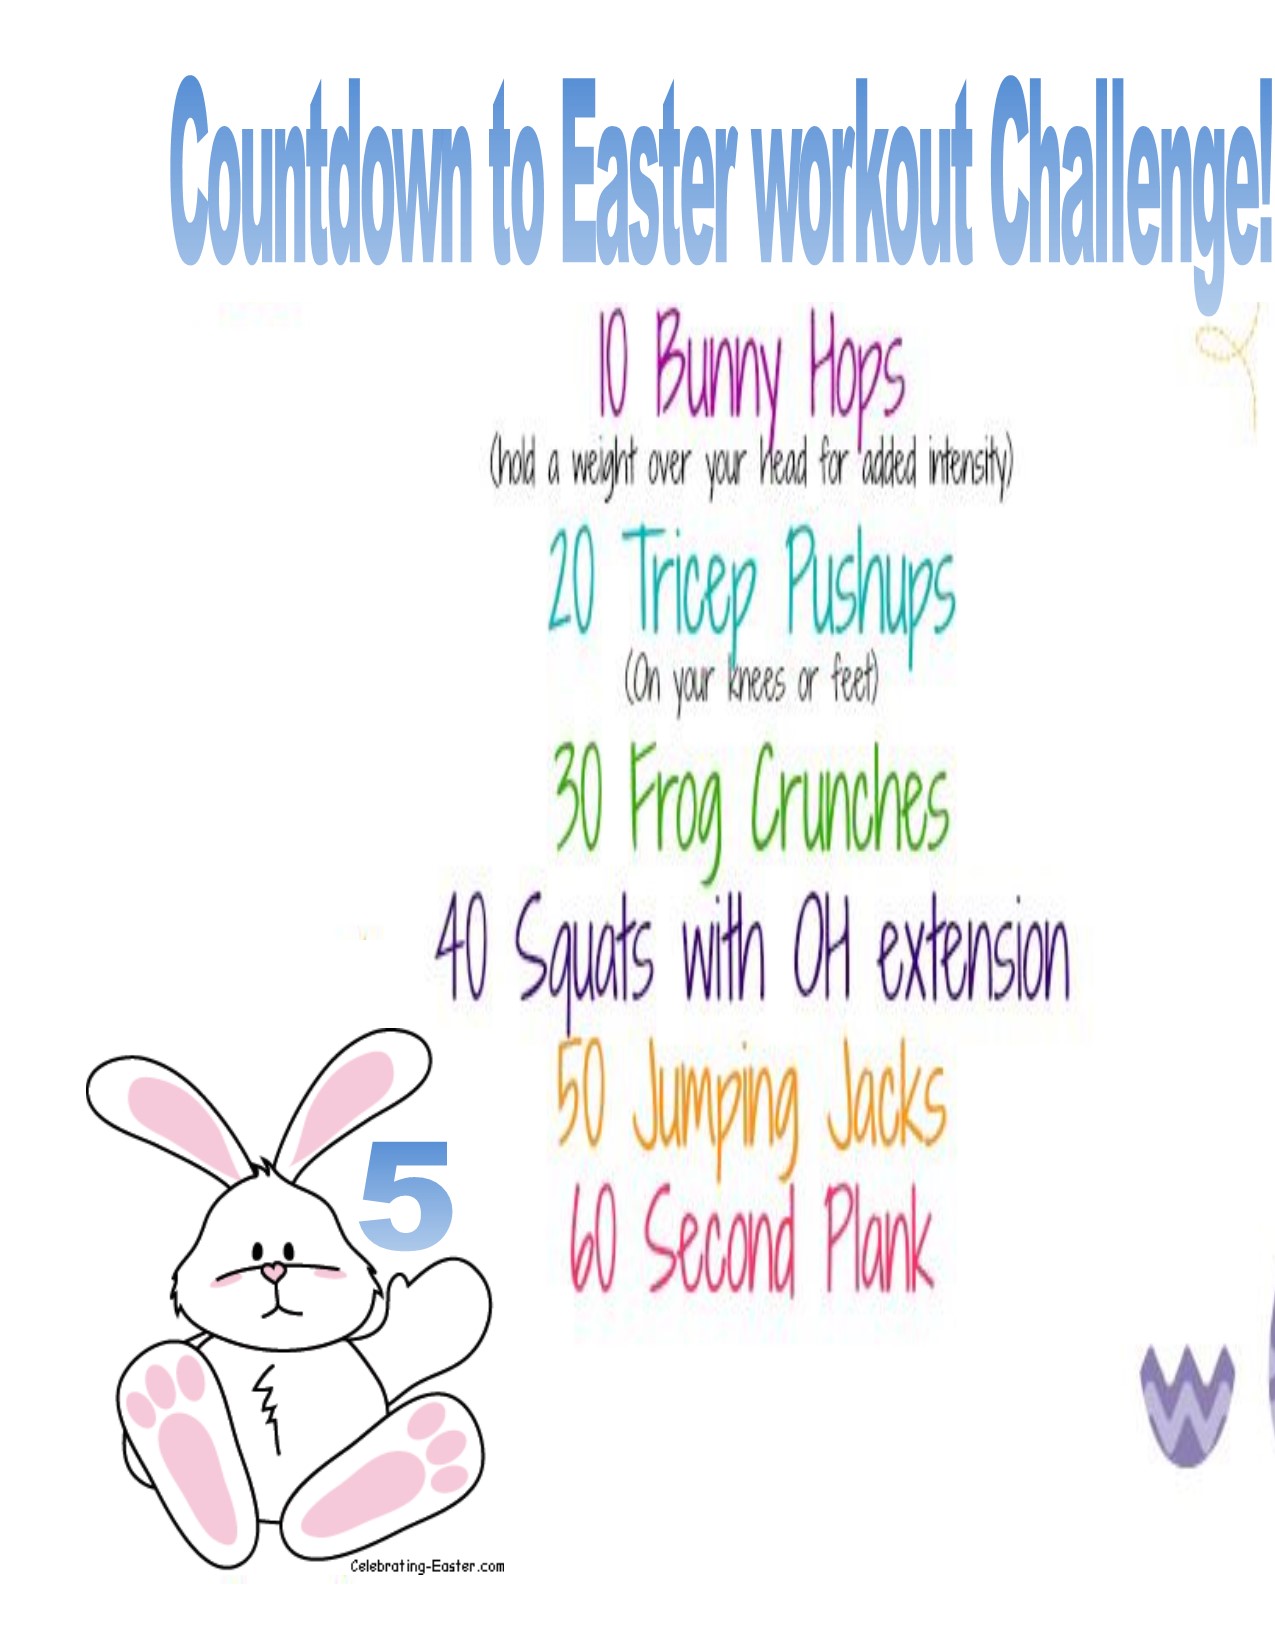 Countdown-to-Easter-Day-5-pg1.jpg